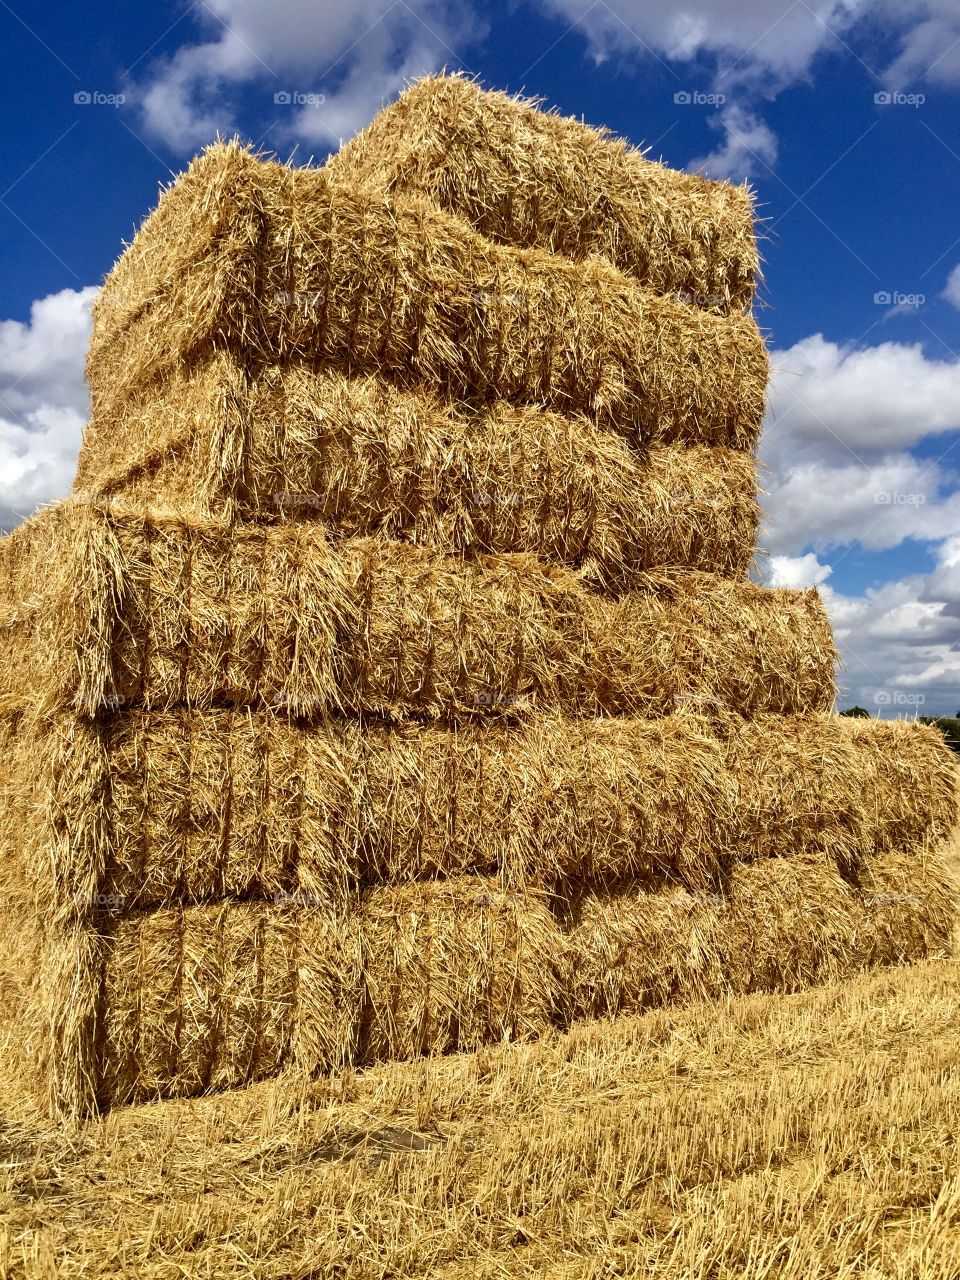 First Hay bales of Summer